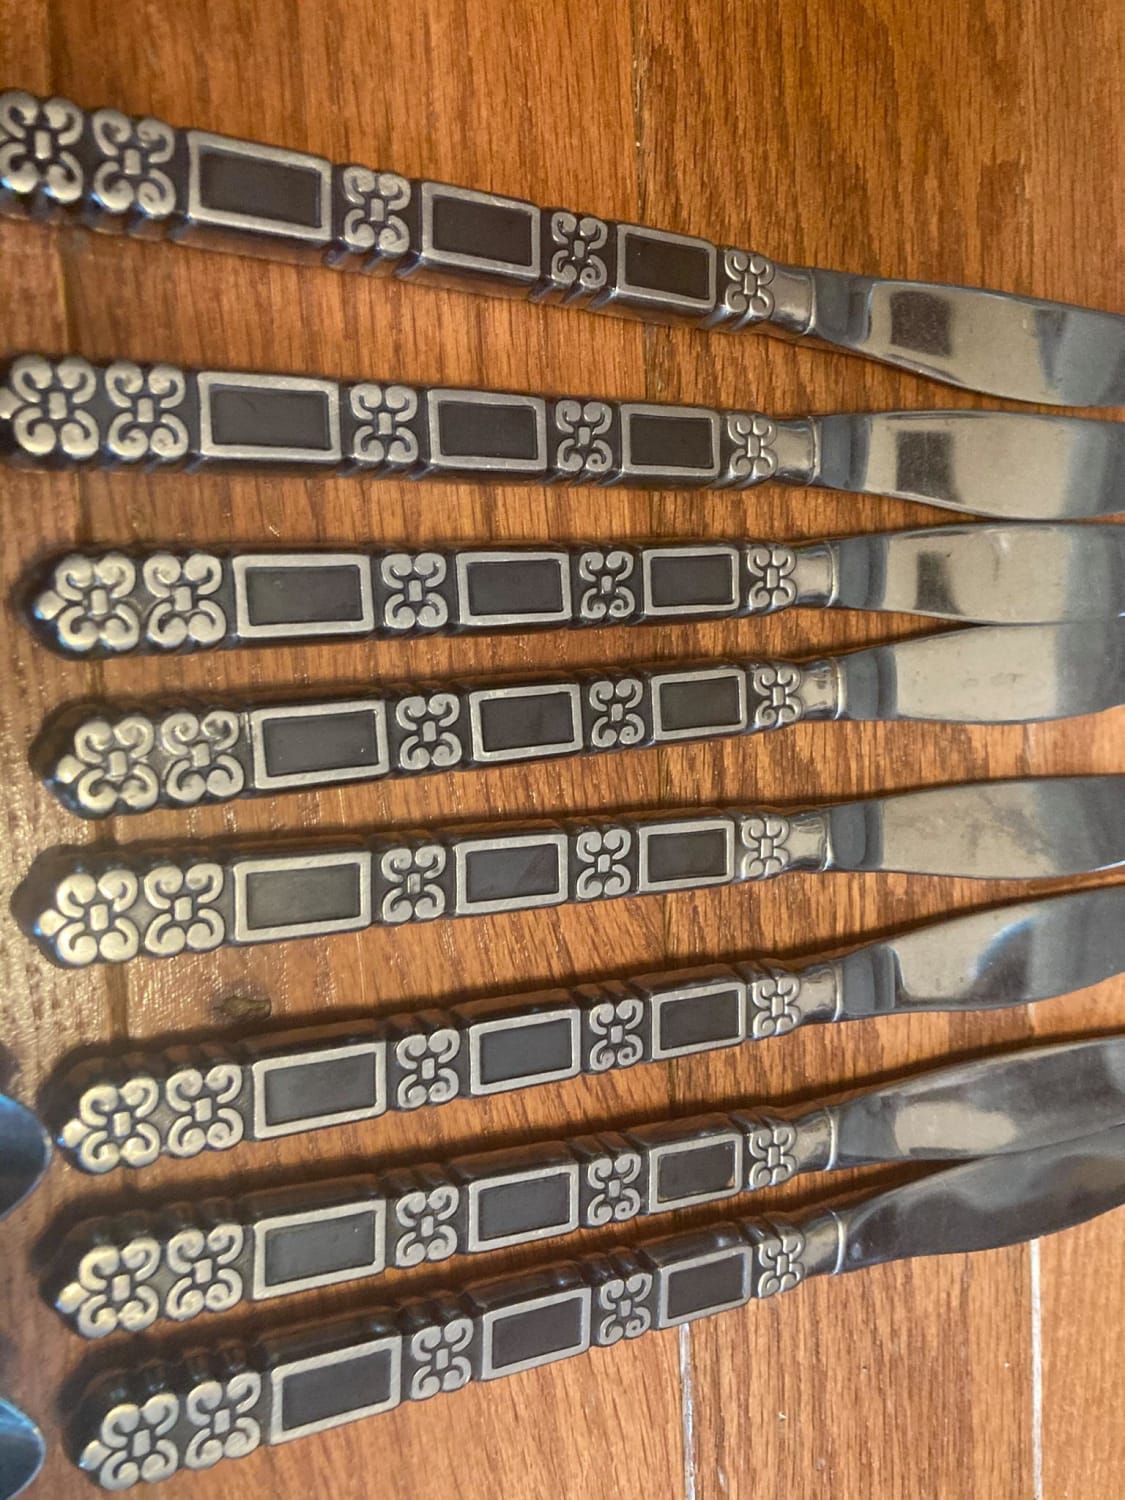 Is there a way to remove the black enamel from stainless steel silverware?